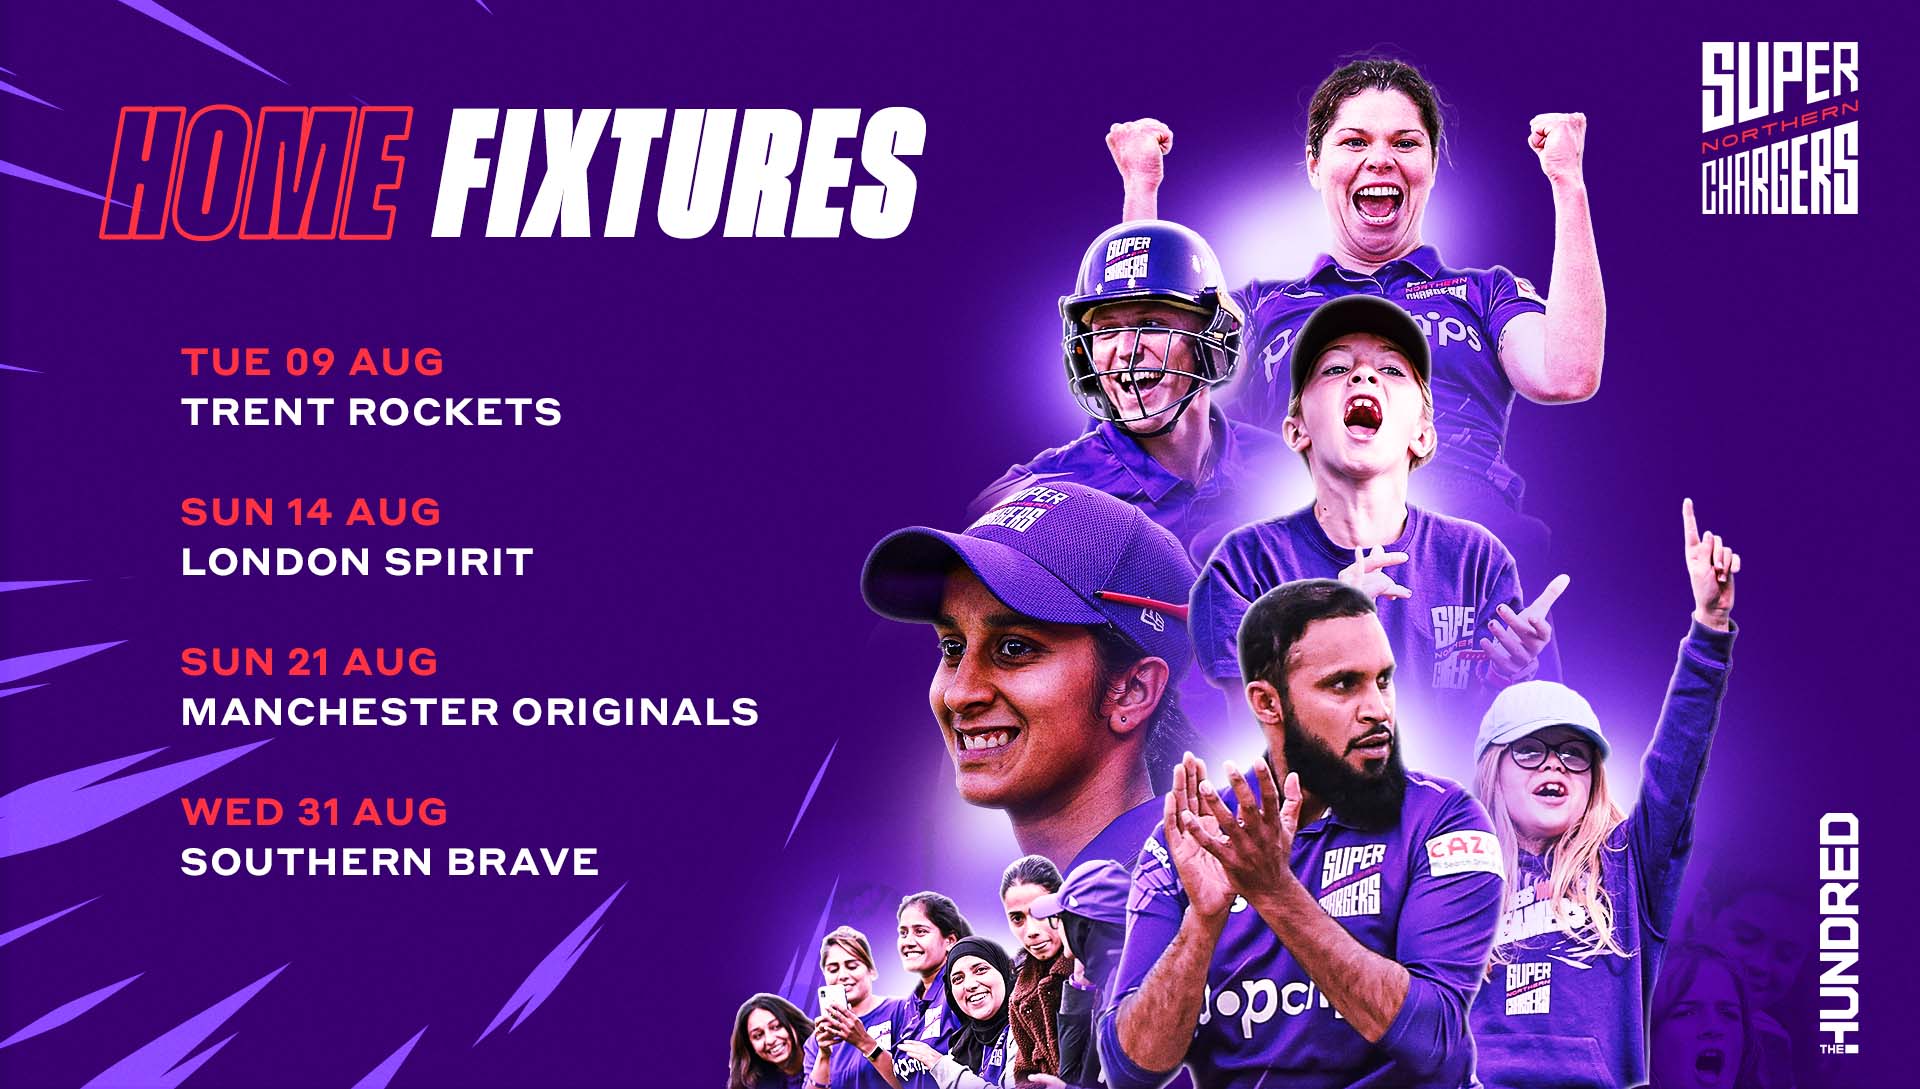 2022 Fixtures Announced For The Hundred Durham Cricket 5940